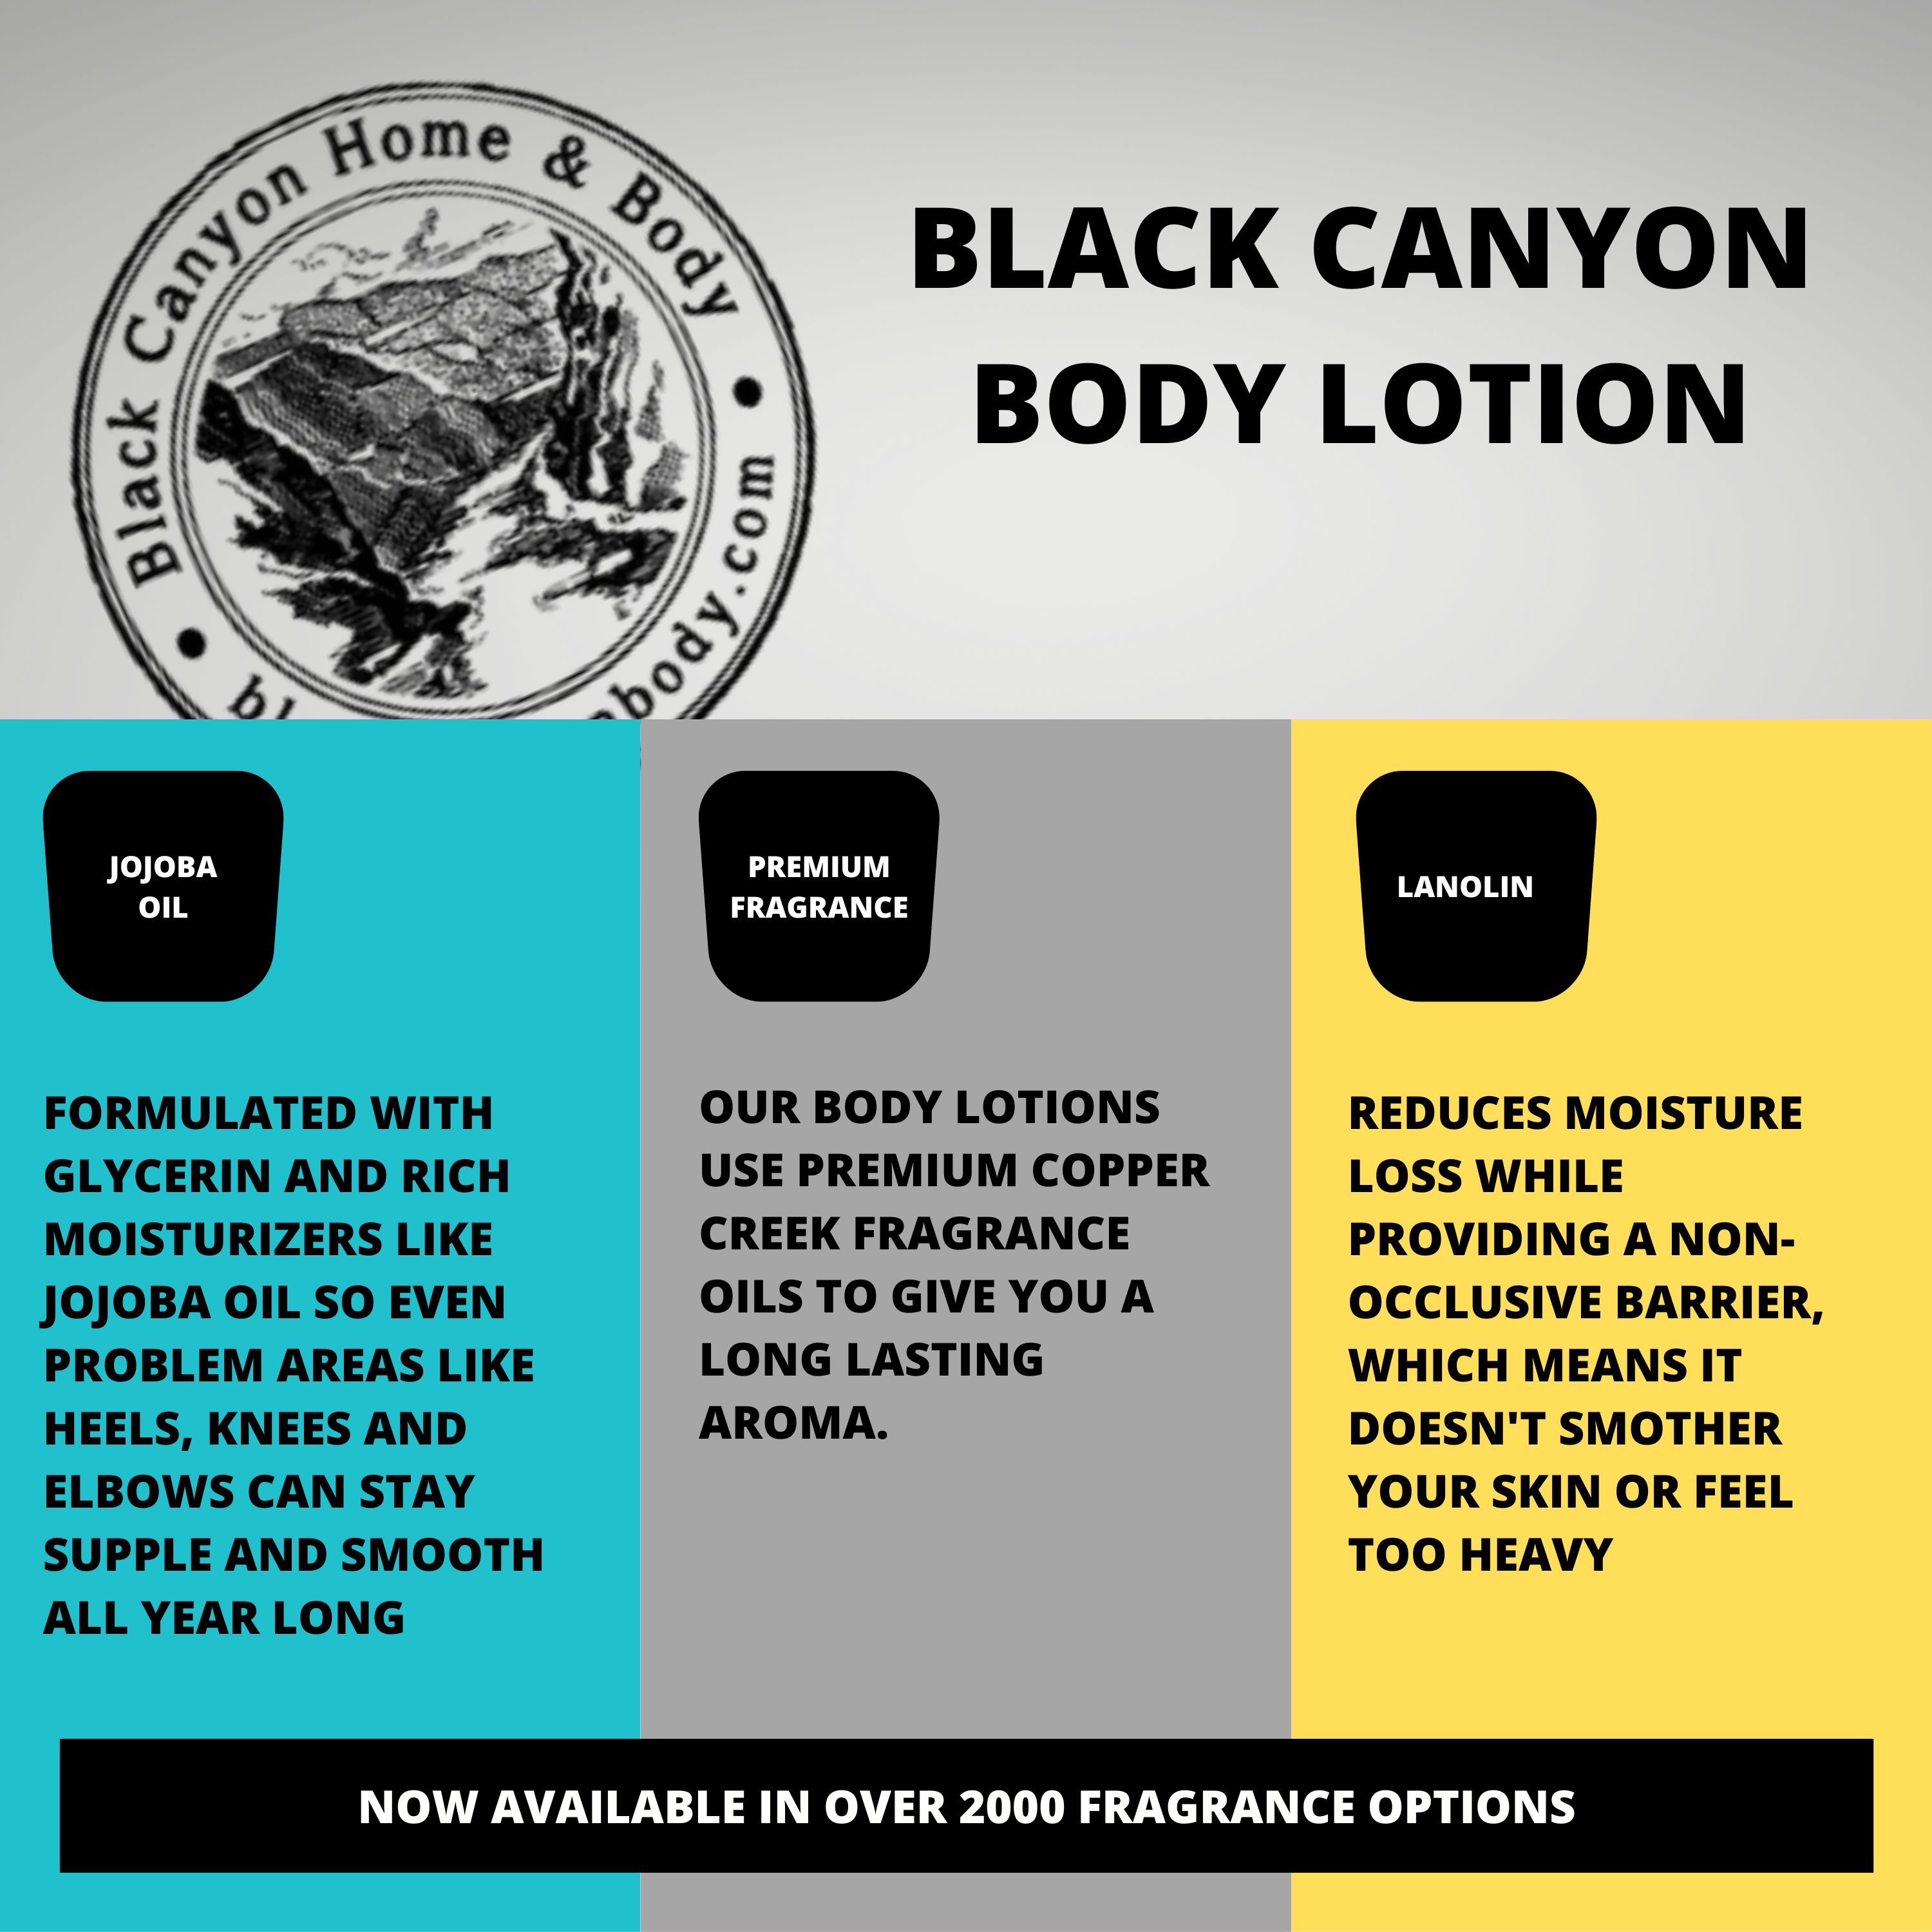 Black Canyon Shirley Temple Scented Luxury Body Lotion with Lanolin and Jojoba Oil